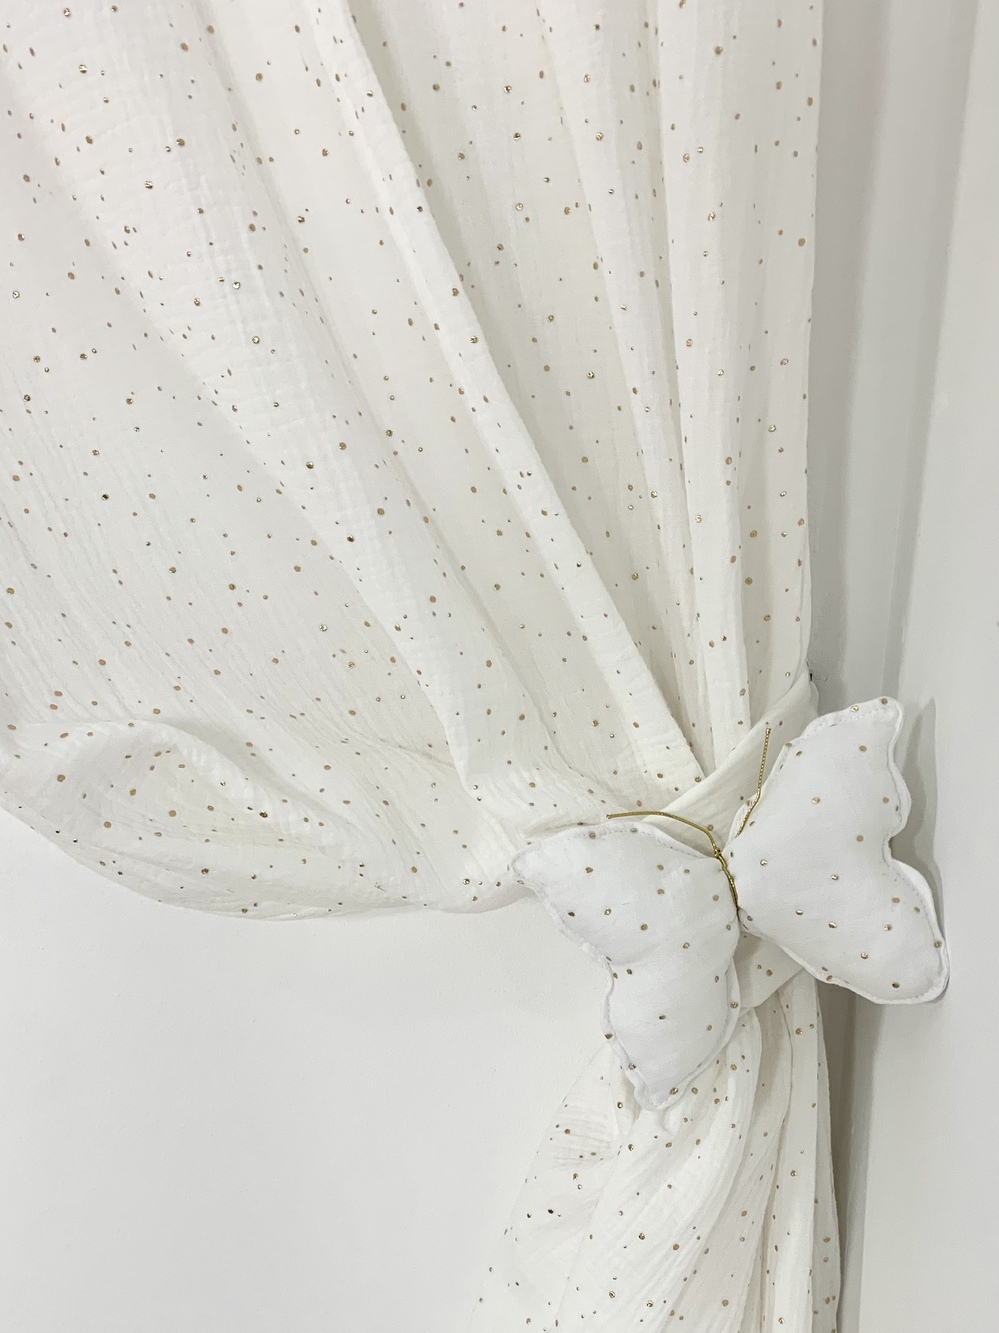 Curtain White And Gold Muslin